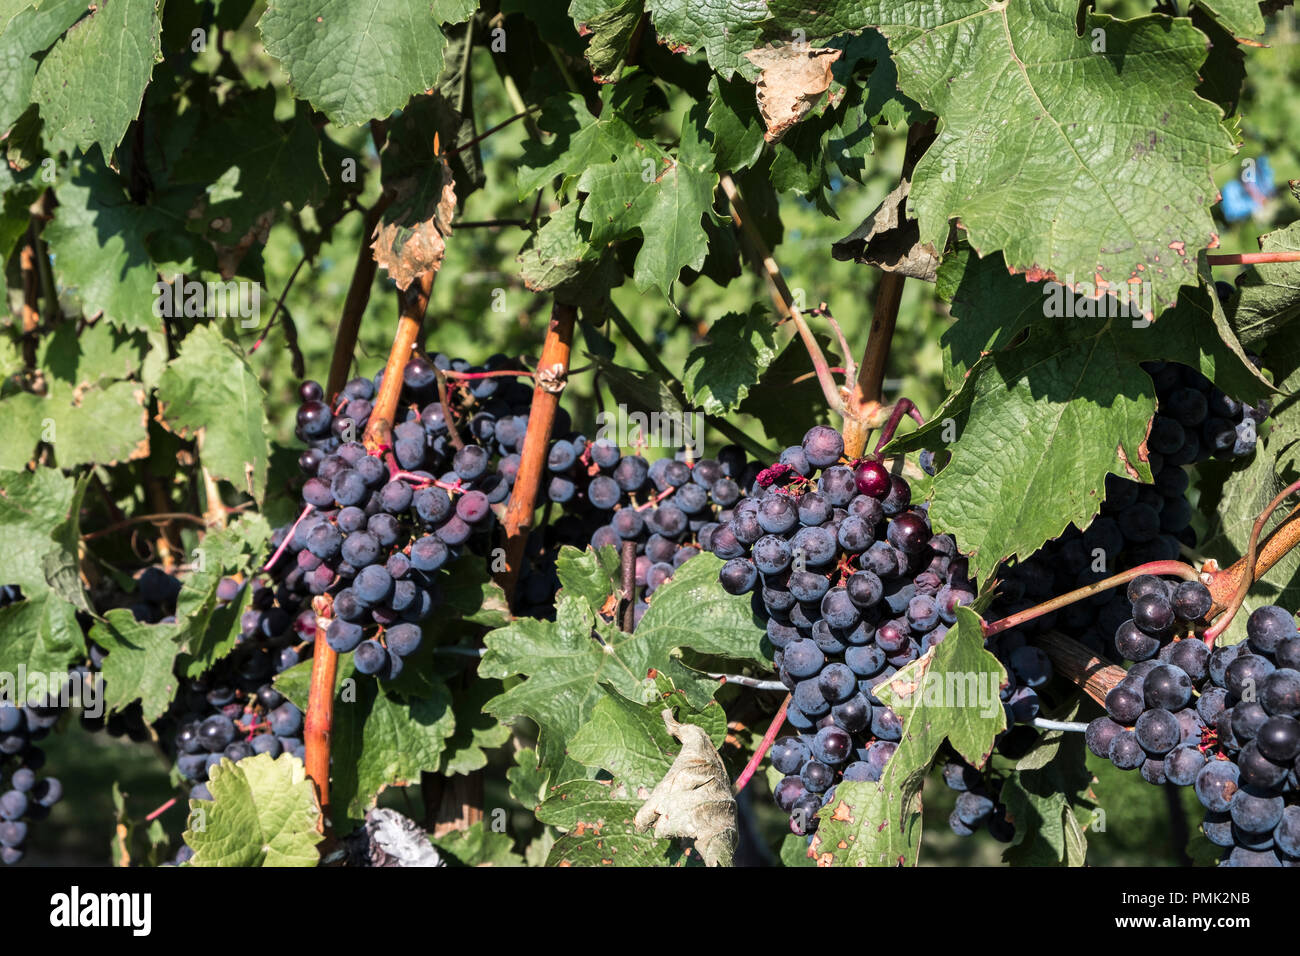 Purple grapes ready for harvest hang of the vines in Niagara on the Lake, Ontario, Canada, Stock Photo